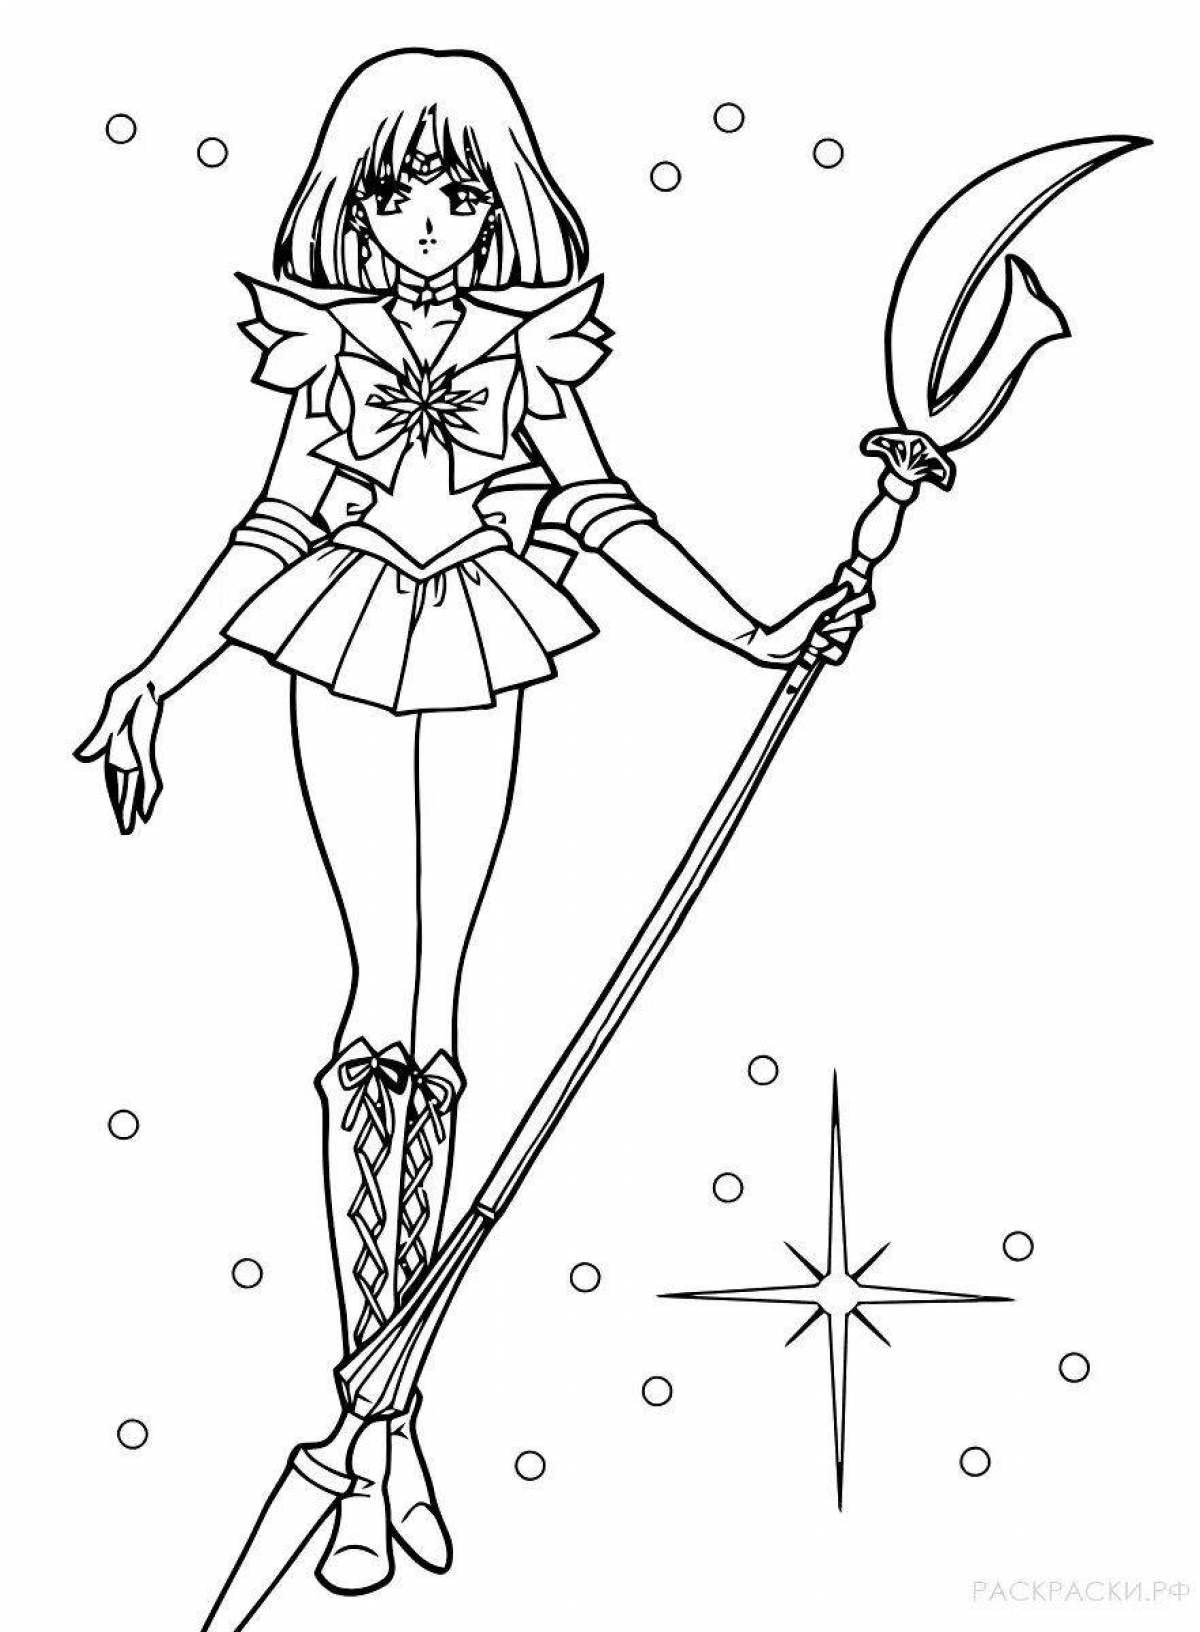 Fancy coloring for girls sailor moon